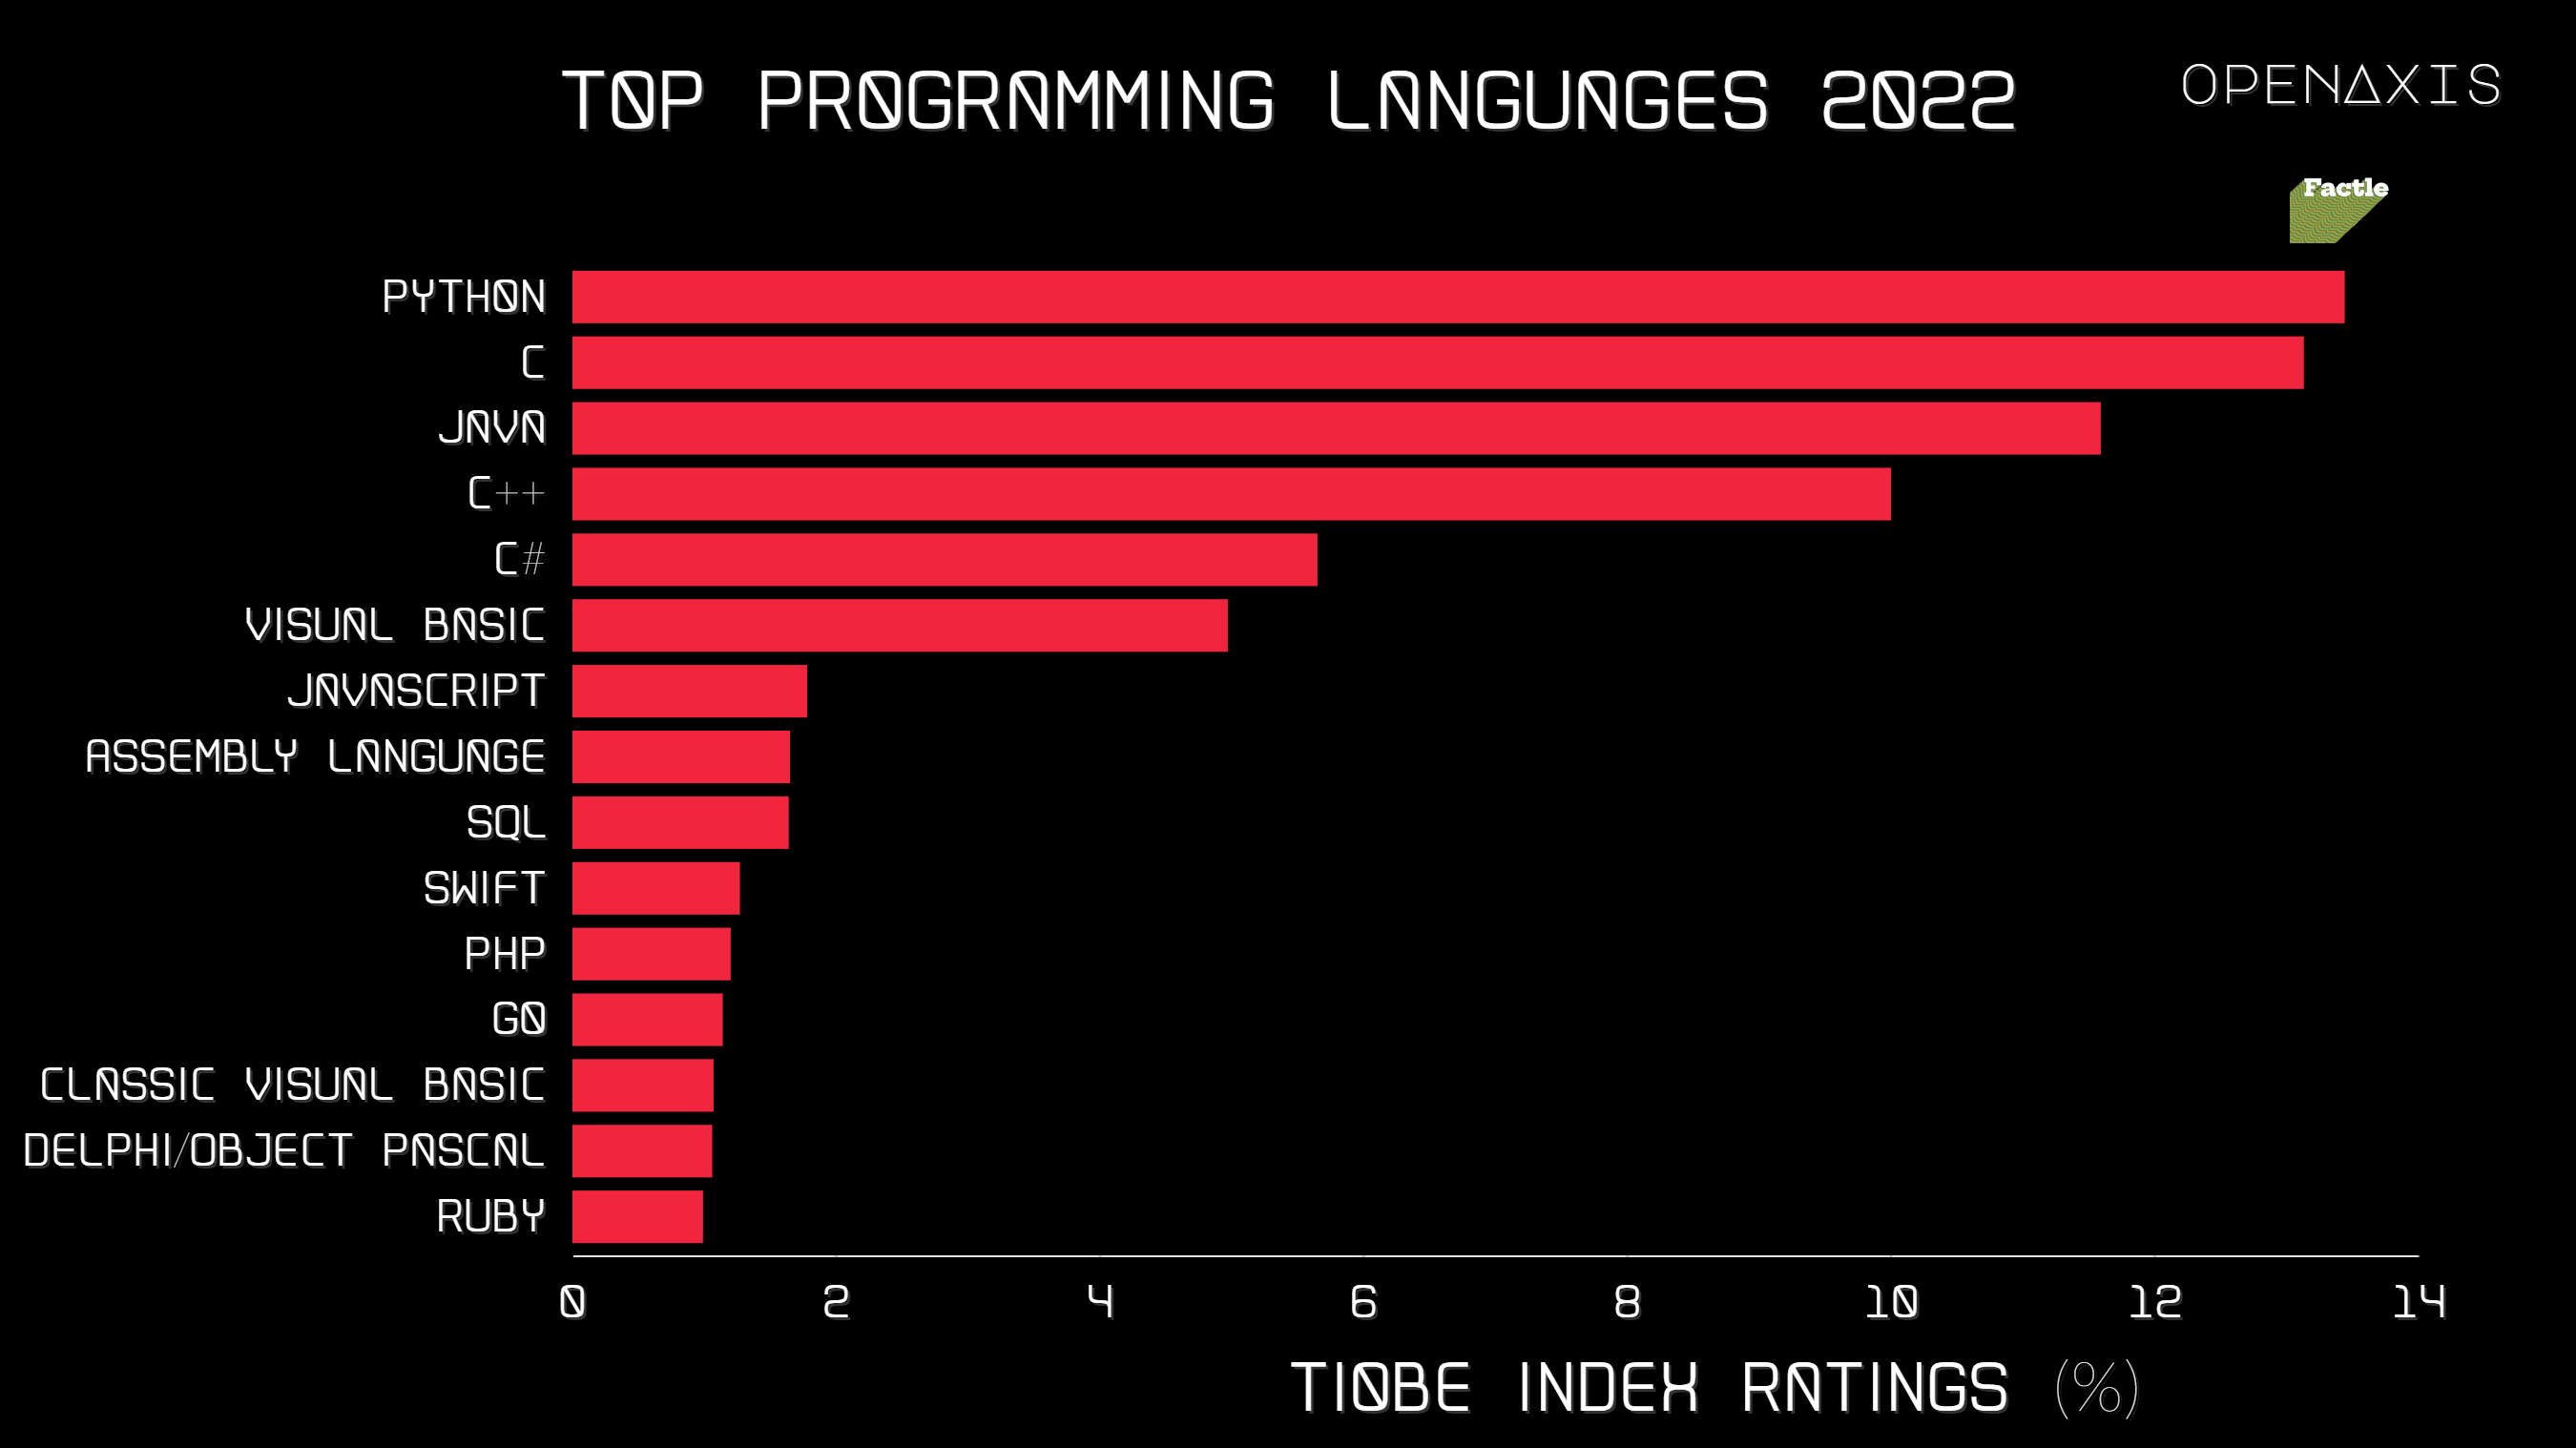 <p>The top 4 languages Python, C, Java, and C++ have a market share of almost 50% together now.</p><p><br /></p><p>The TIOBE Programming Community index is an indicator of the popularity of programming languages. The index is updated once a month. The ratings are based on the number of skilled engineers world-wide, courses and third party vendors. Popular search engines such as Google, Bing, Yahoo!, Wikipedia, Amazon, YouTube and Baidu are used to calculate the ratings. It is important to note that the TIOBE index is not about the best programming language or the language in which most lines of code have been written.</p><p><br /></p><p>The index can be used to check whether your programming skills are still up to date or to make a strategic decision about what programming language should be adopted when starting to build a new software system.</p><p><br /></p><p><span data-index="0" data-denotation-char data-id="0" data-value="&lt;a href=&quot;/search?q=%23code&quot; target=_self&gt;#code" data-link="/search?q=%23code">﻿<span contenteditable="false"><span></span><a href="/search?q=%23code" target="_self">#code</a></span>﻿</span> <span data-index="0" data-denotation-char data-id="0" data-value="&lt;a href=&quot;/search?q=%23engineering&quot; target=_self&gt;#engineering" data-link="/search?q=%23engineering">﻿<span contenteditable="false"><span></span><a href="/search?q=%23engineering" target="_self">#engineering</a></span>﻿</span></p><p><br /></p><p>Source: <a href="/data/4017" target="_blank">TIOBE Index</a></p><p><br /></p>